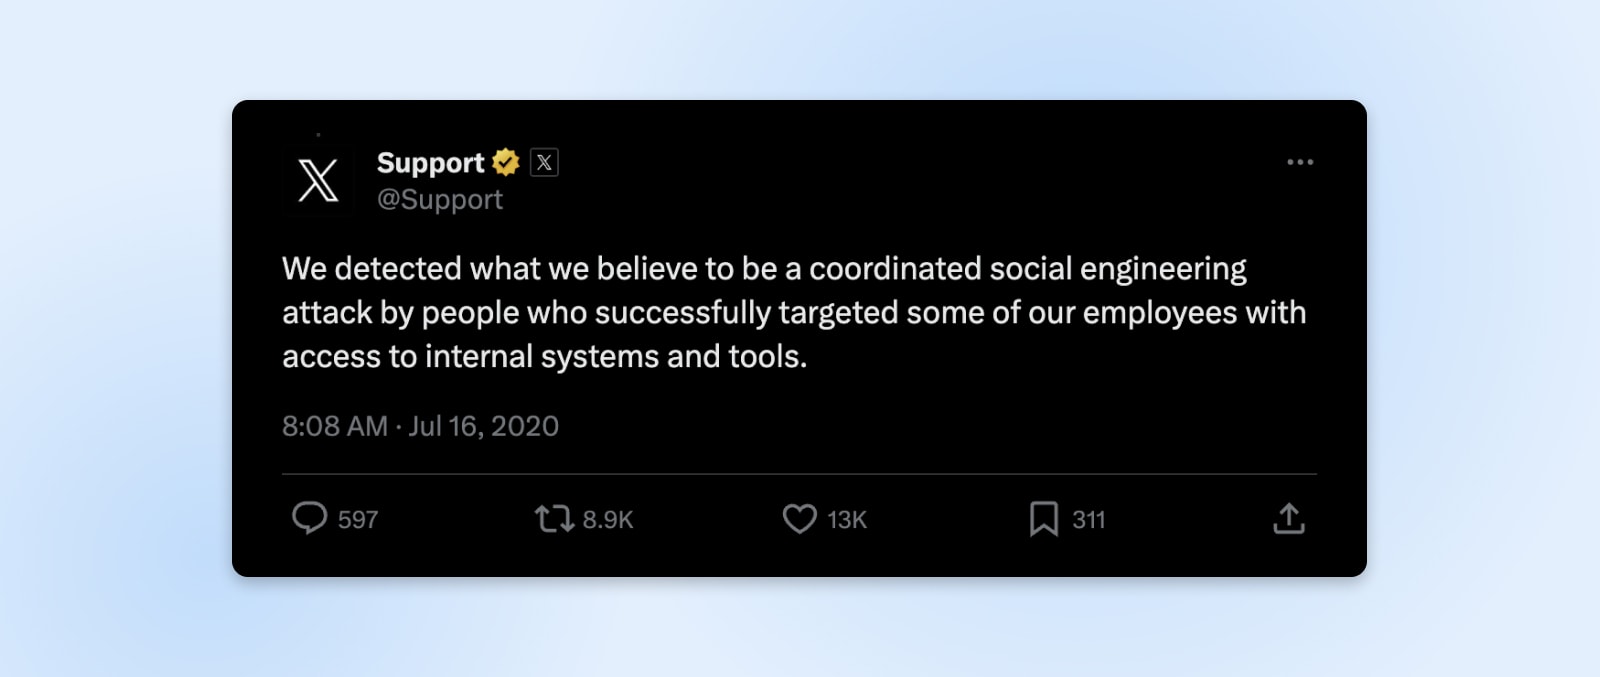 Twitter post from @Support "We detected what we believe to be coordinated social engineering attack by people who successfully targeted some of our employees with access to internal systems and tools." 